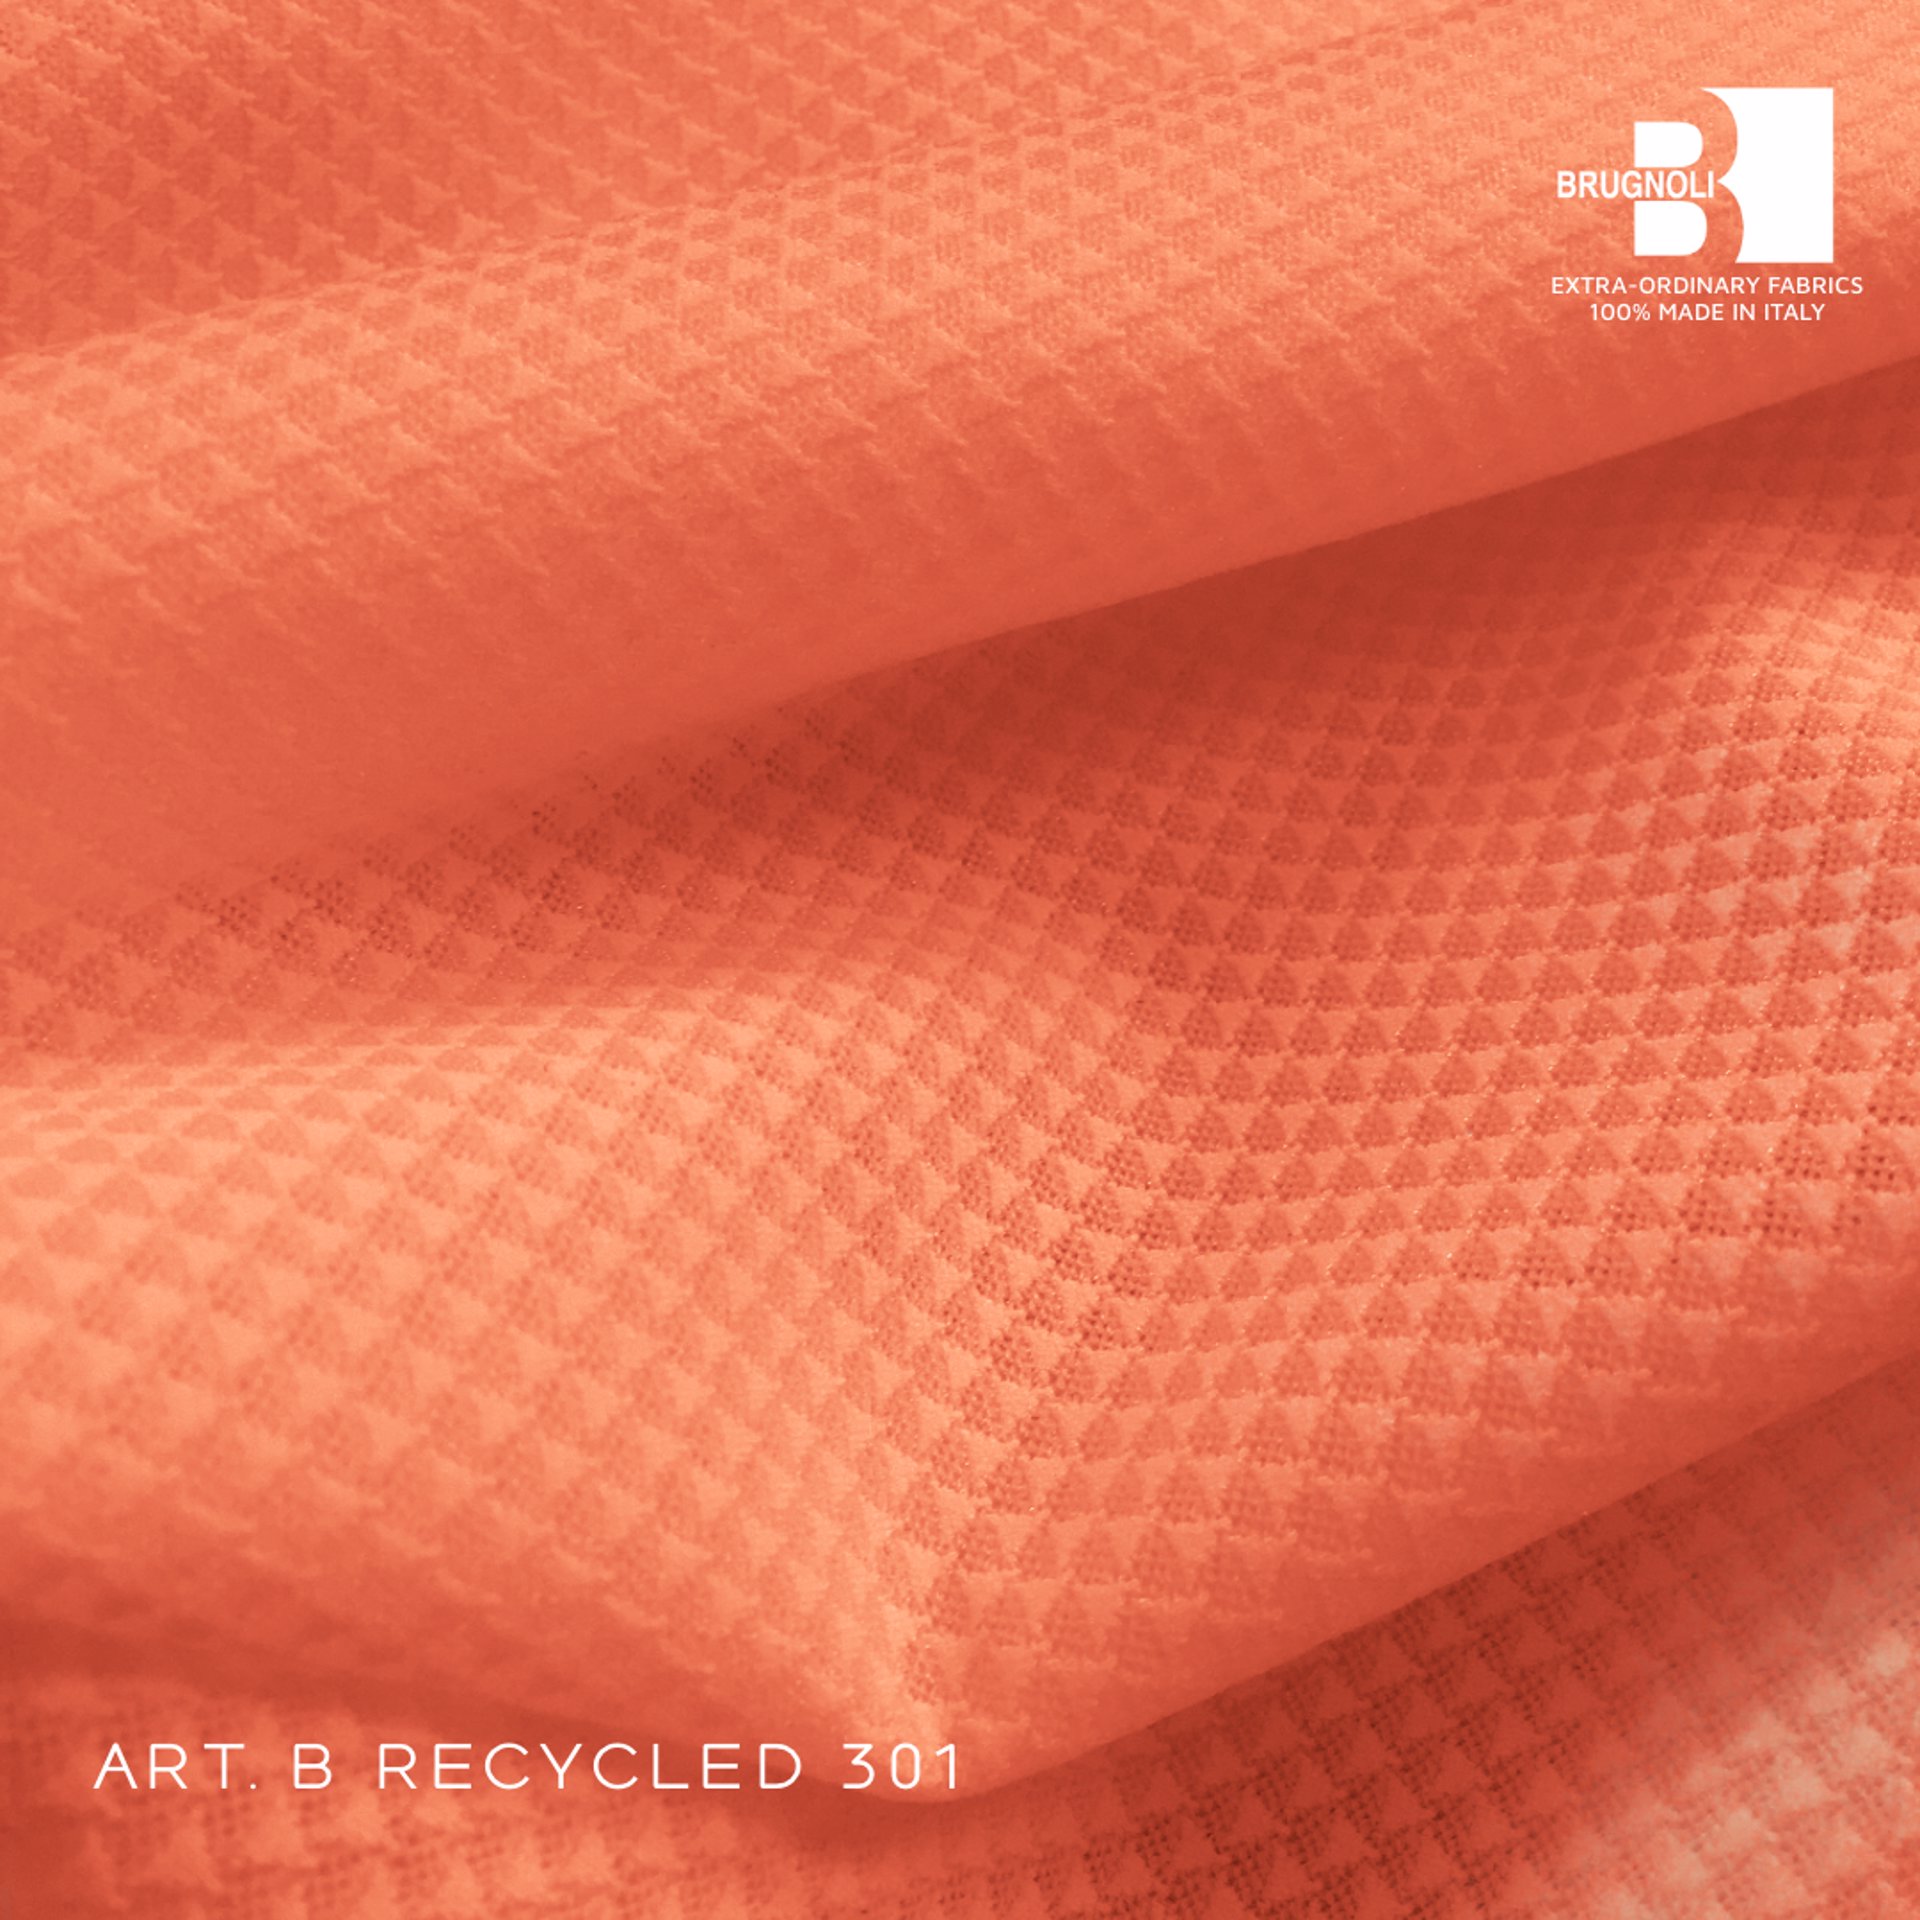 B RECYCLED 301